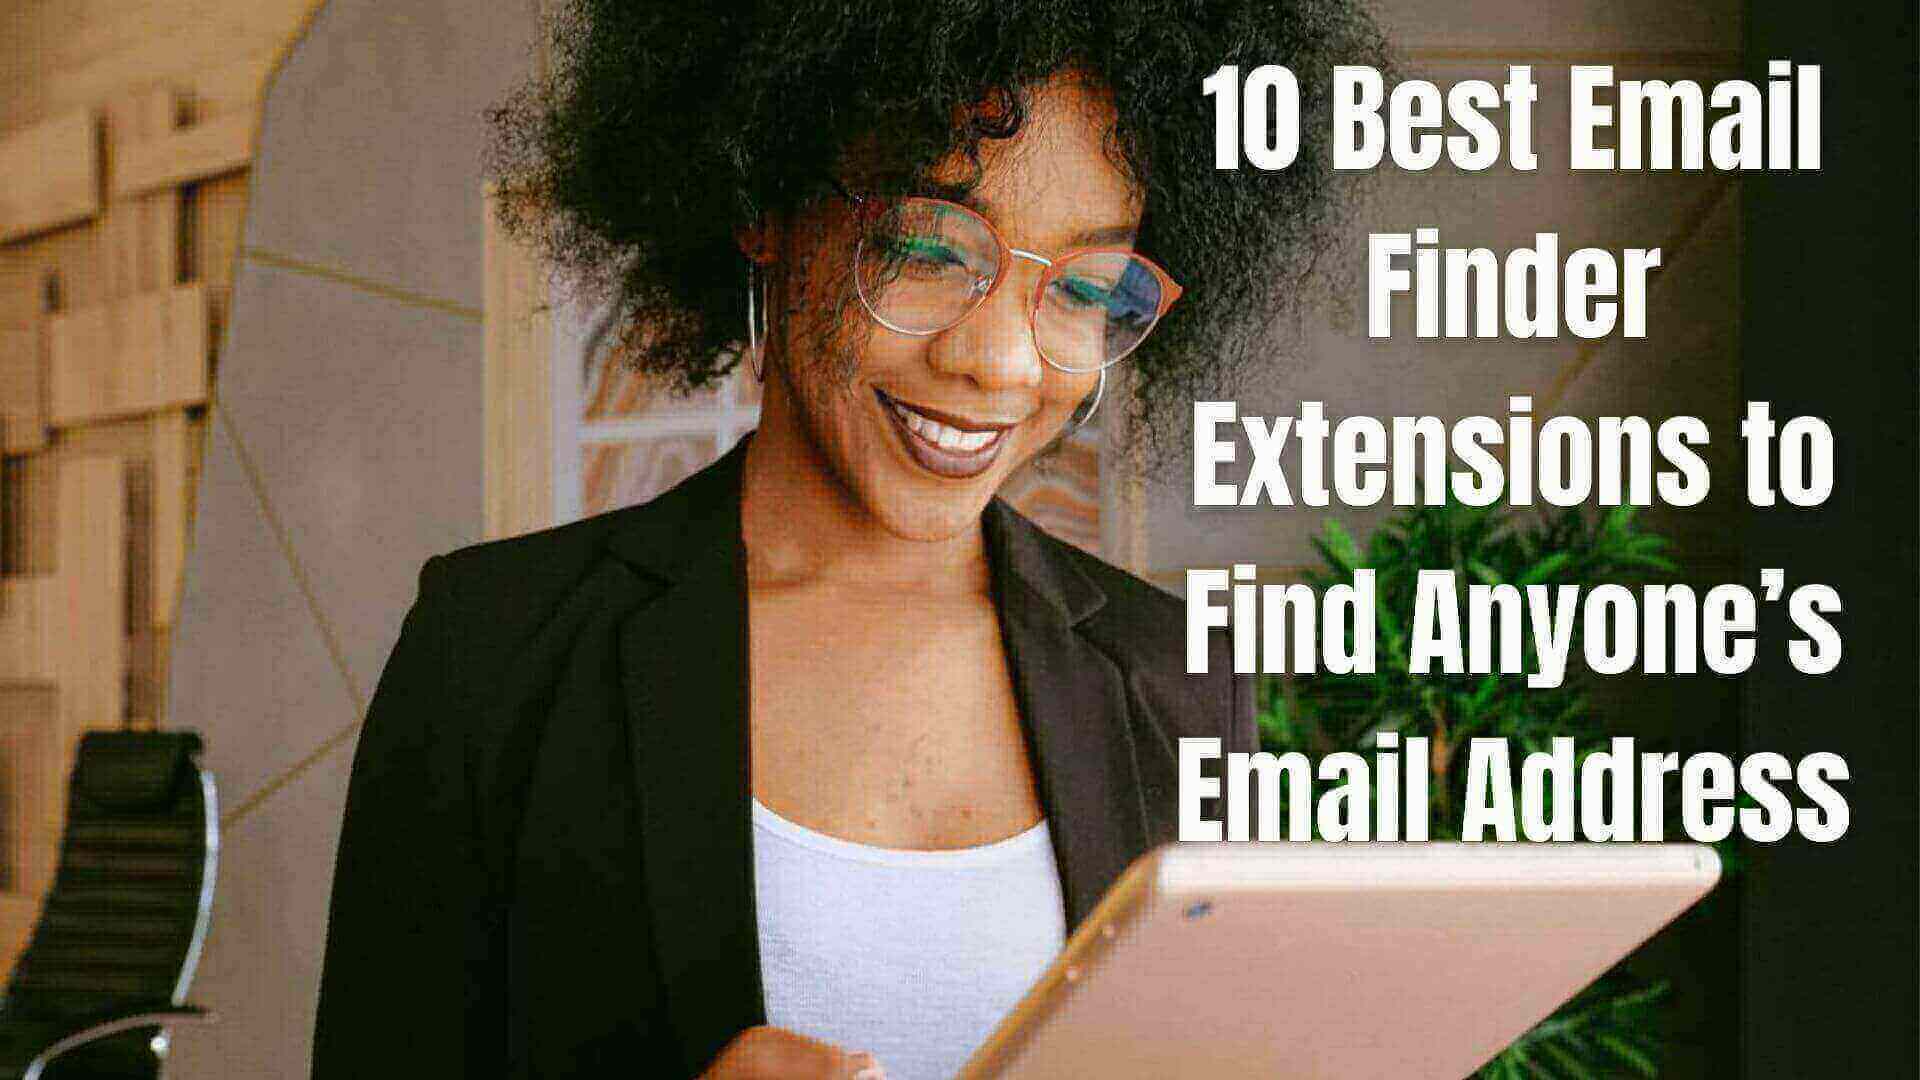 10 Best Email Finder Extensions to Find Anyone’s Email Address